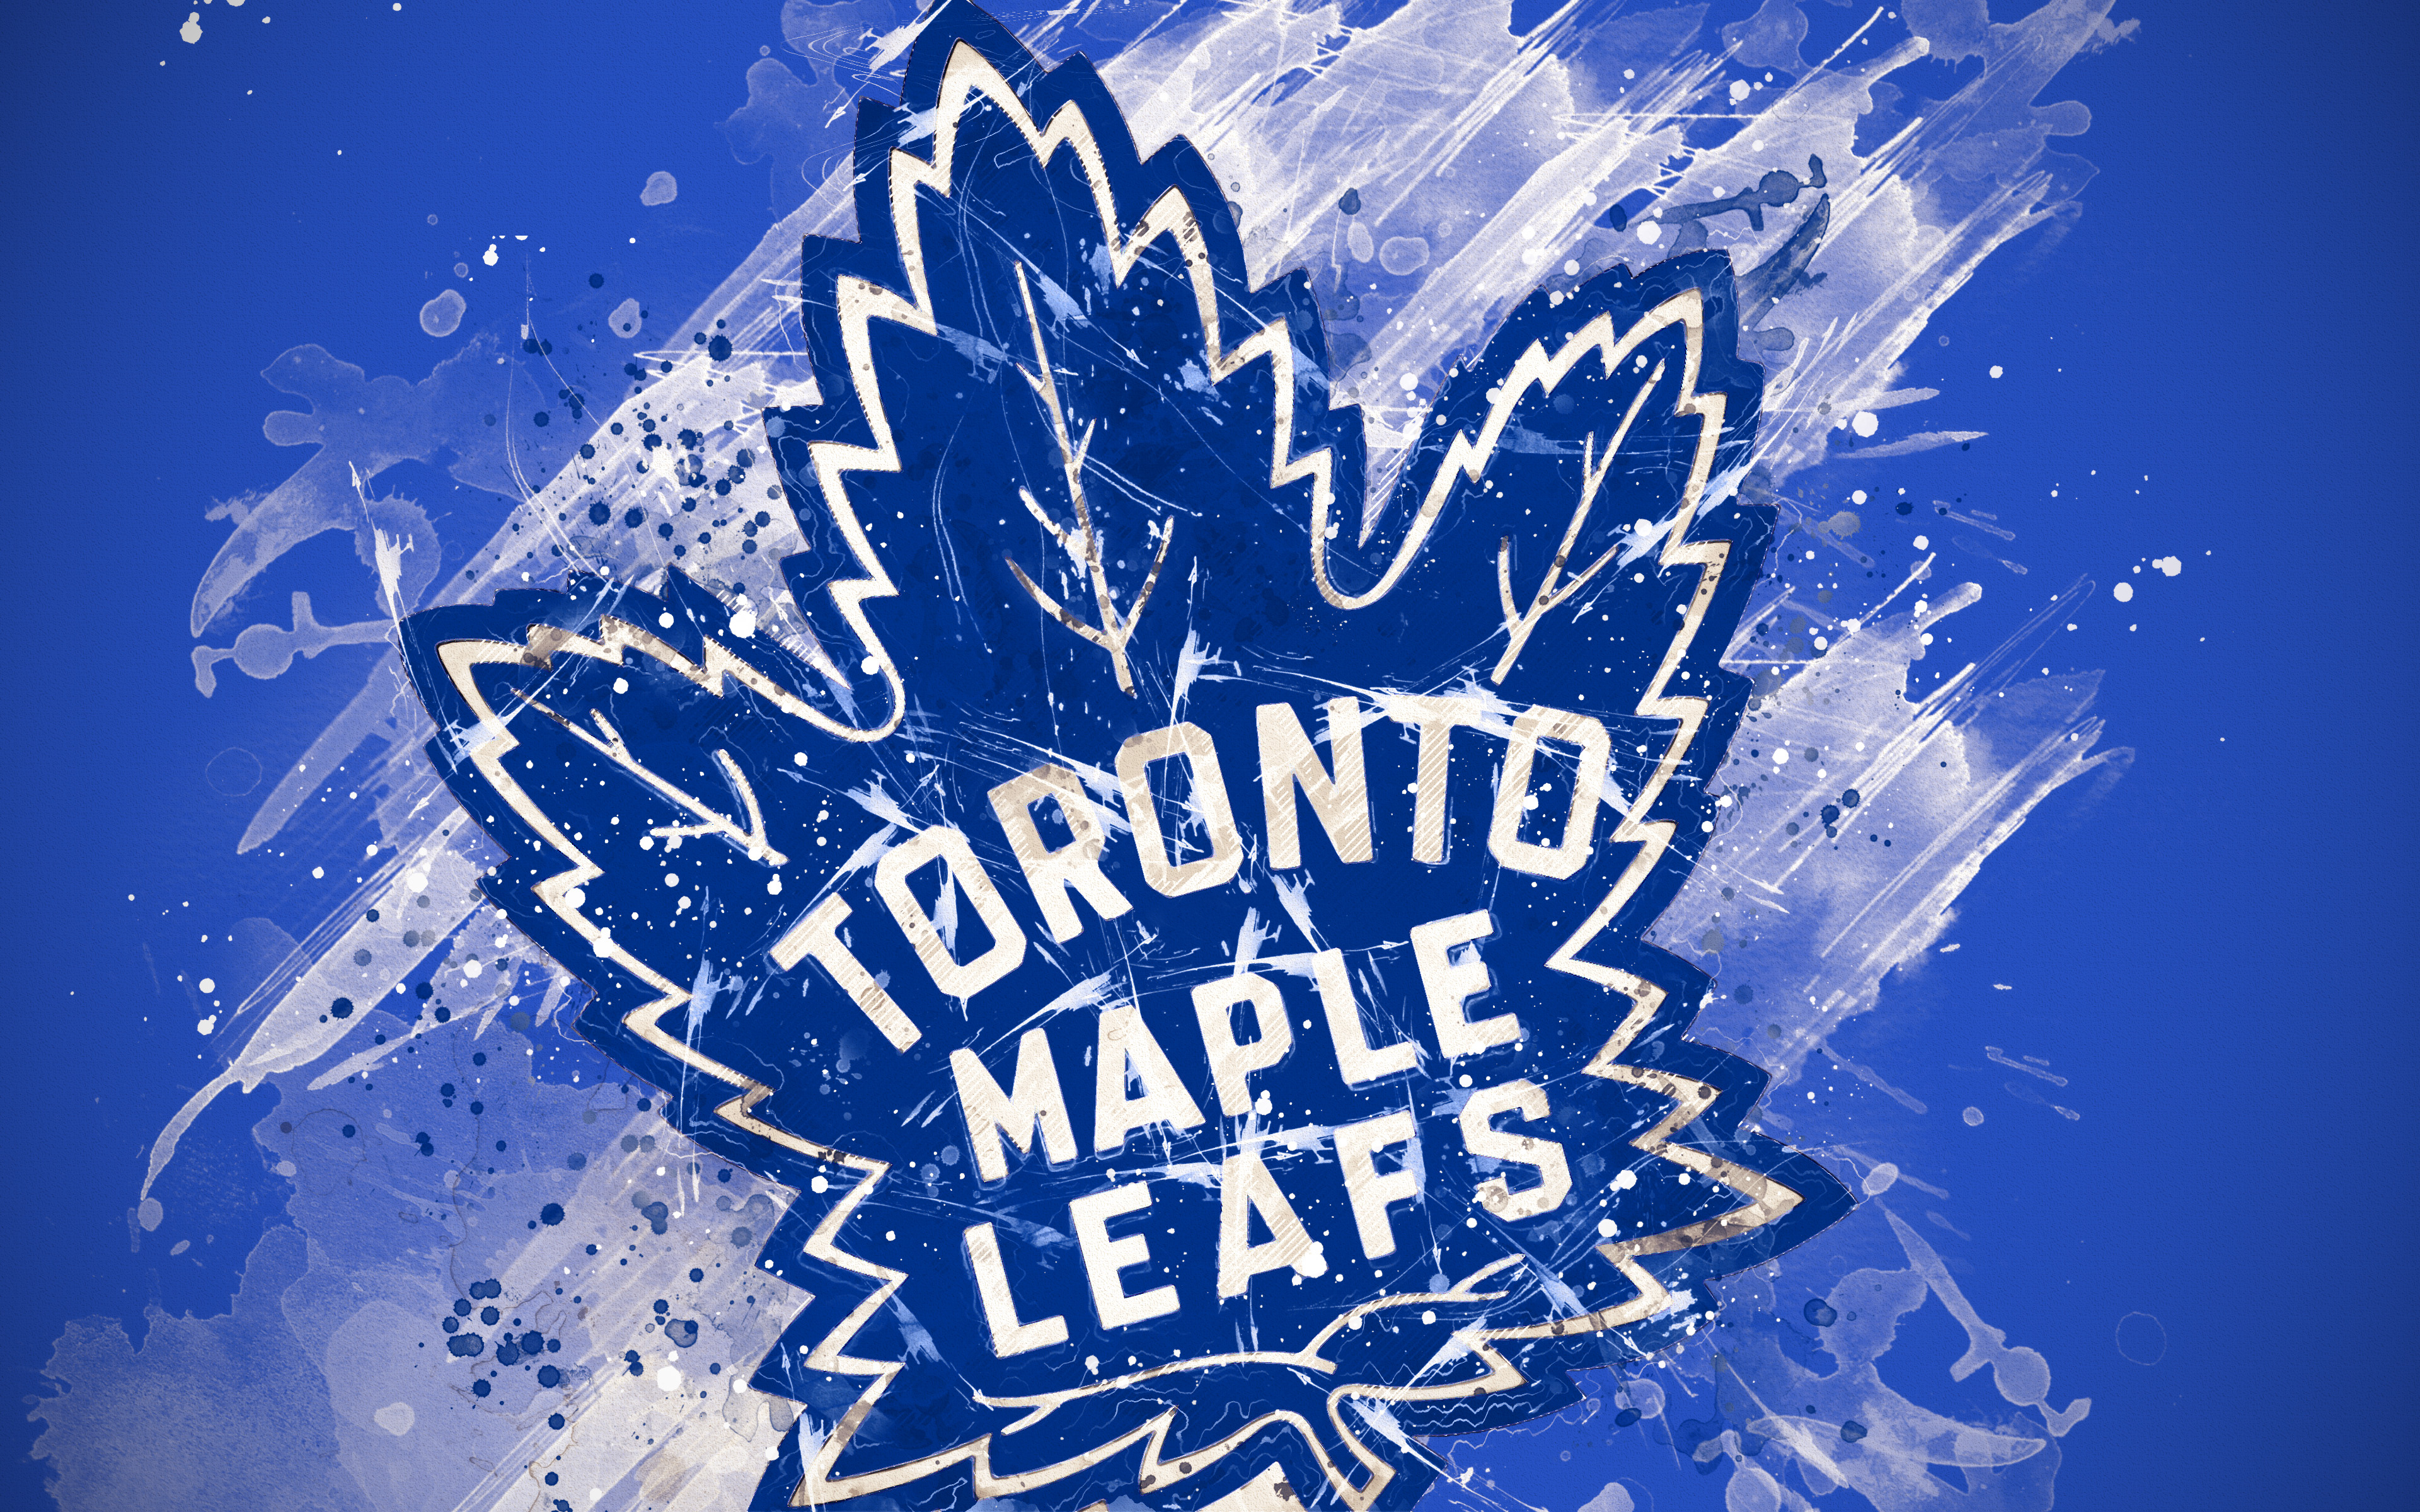 Toronto Maple Leafs wallpaper by EthG0109 - Download on ZEDGE™